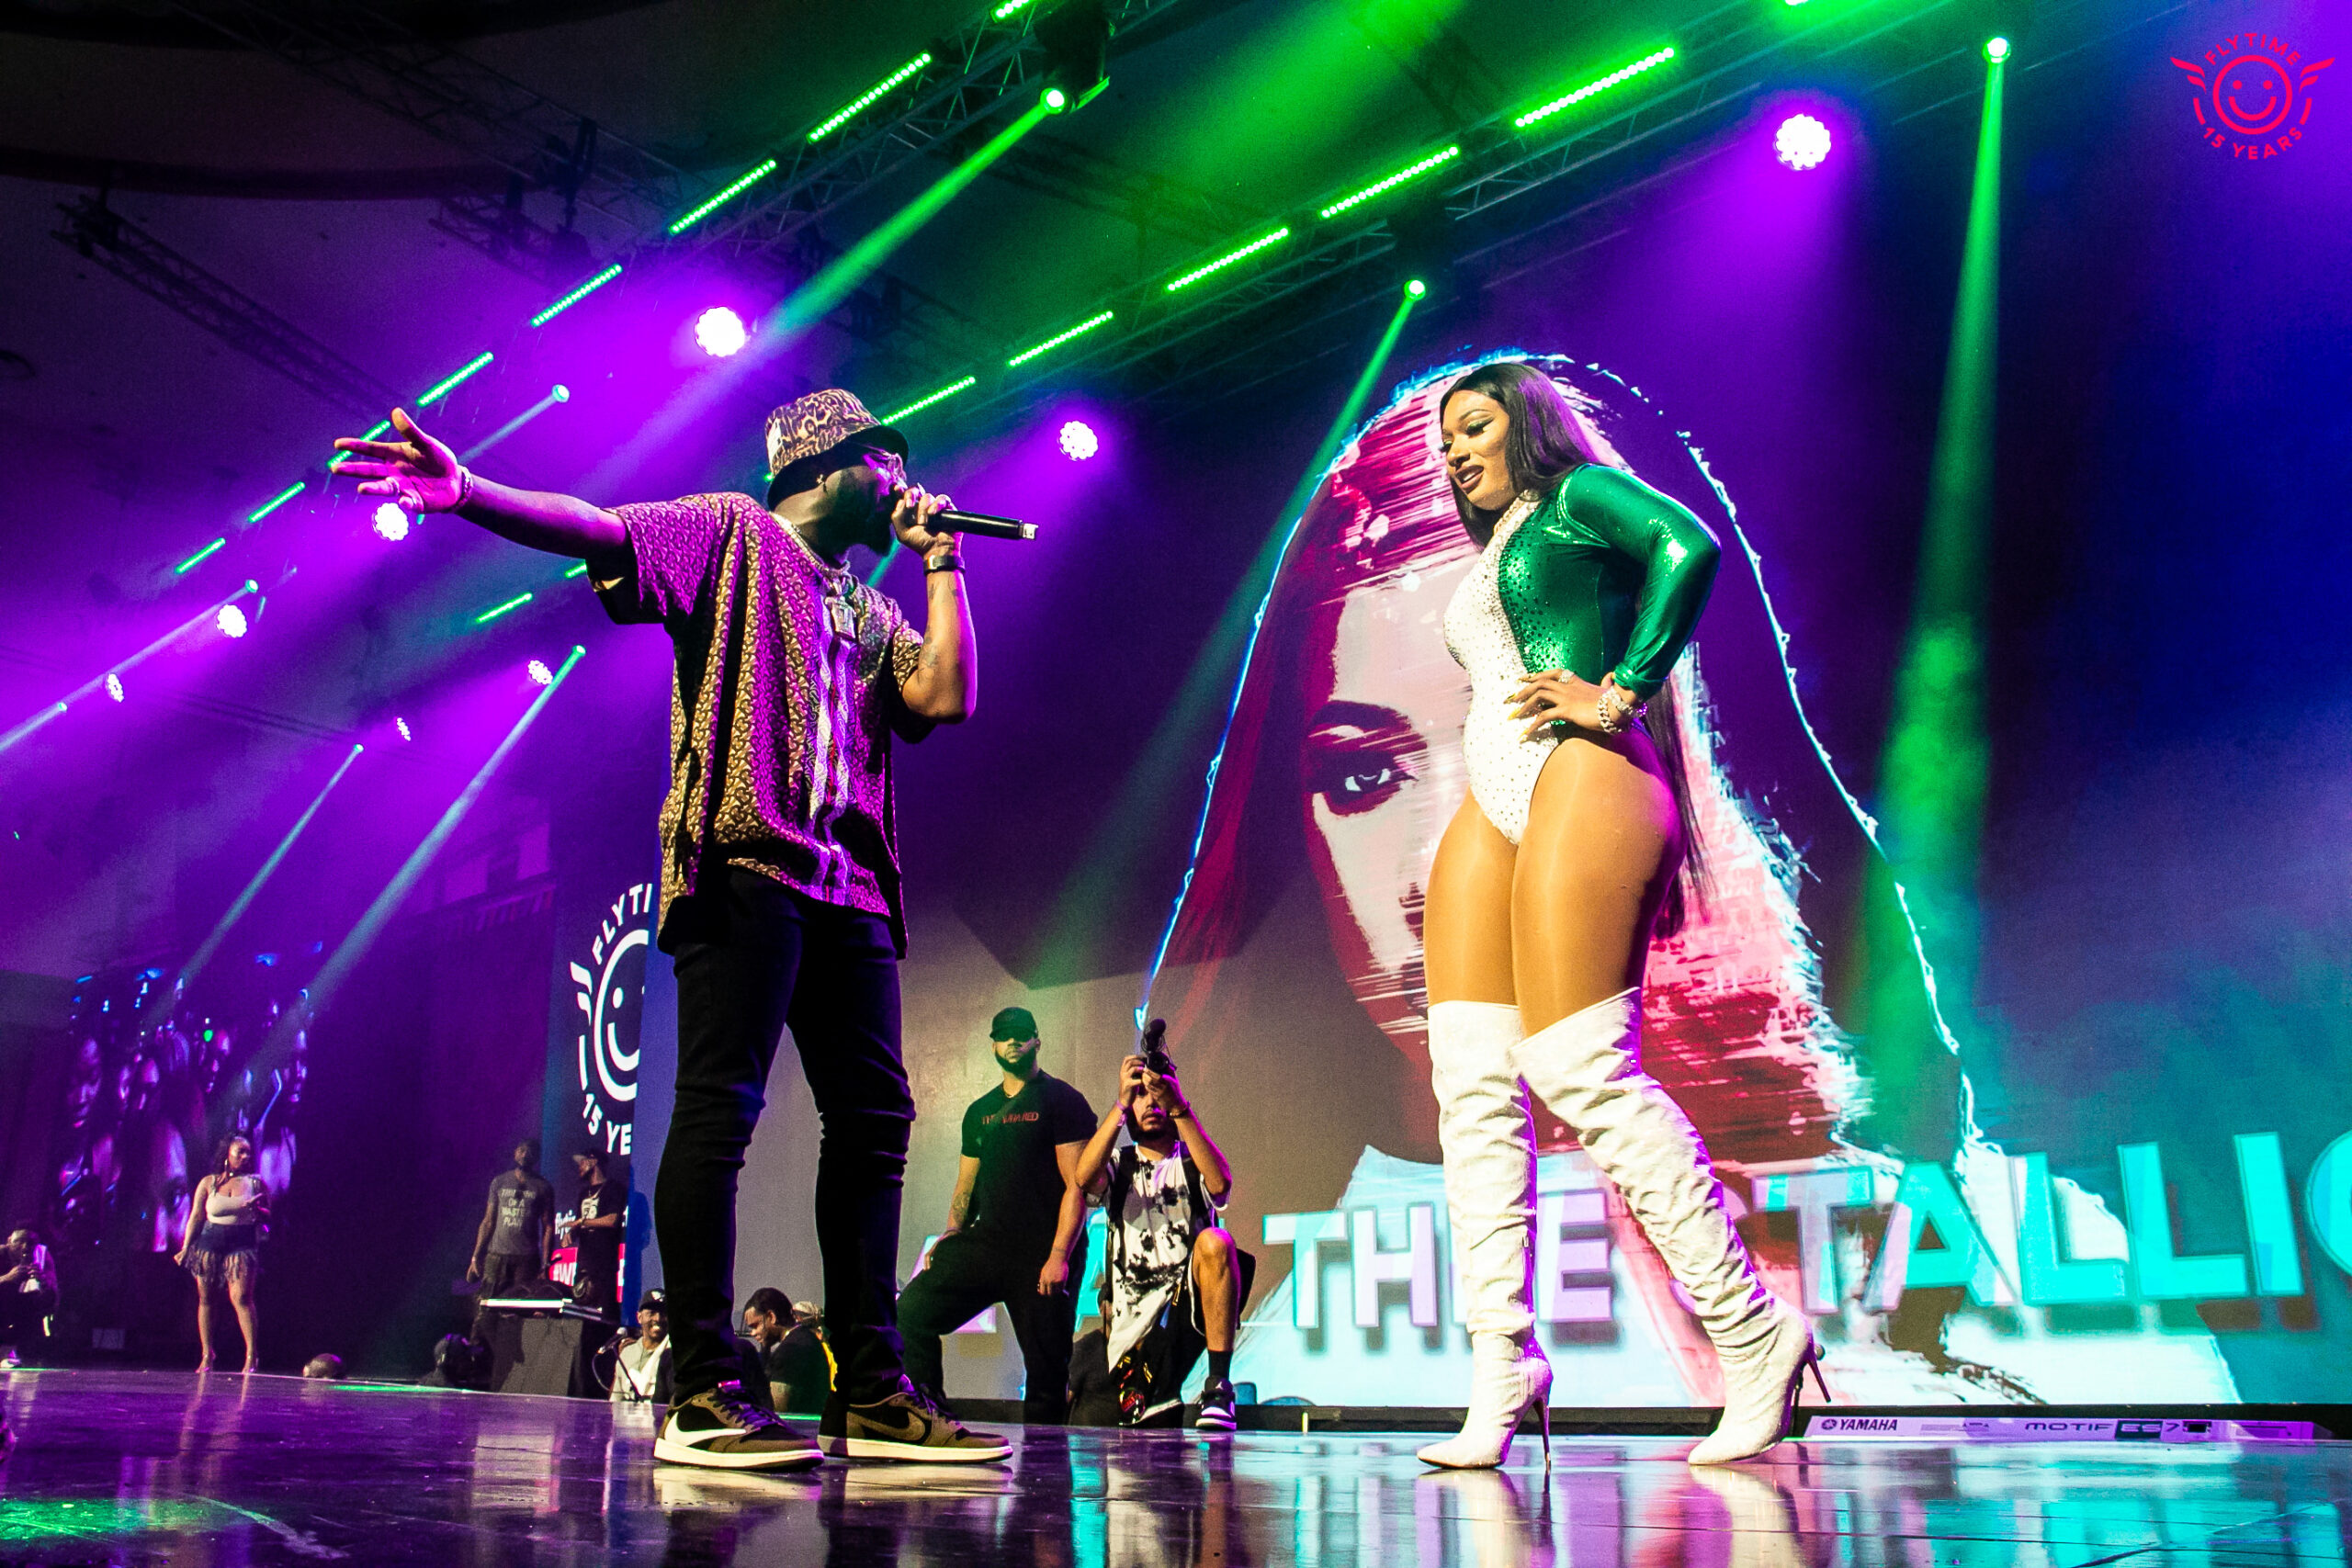 Davido and Megan Thee Stallion performing at Flytime Fest 2019, organized by Flytime Promotions.